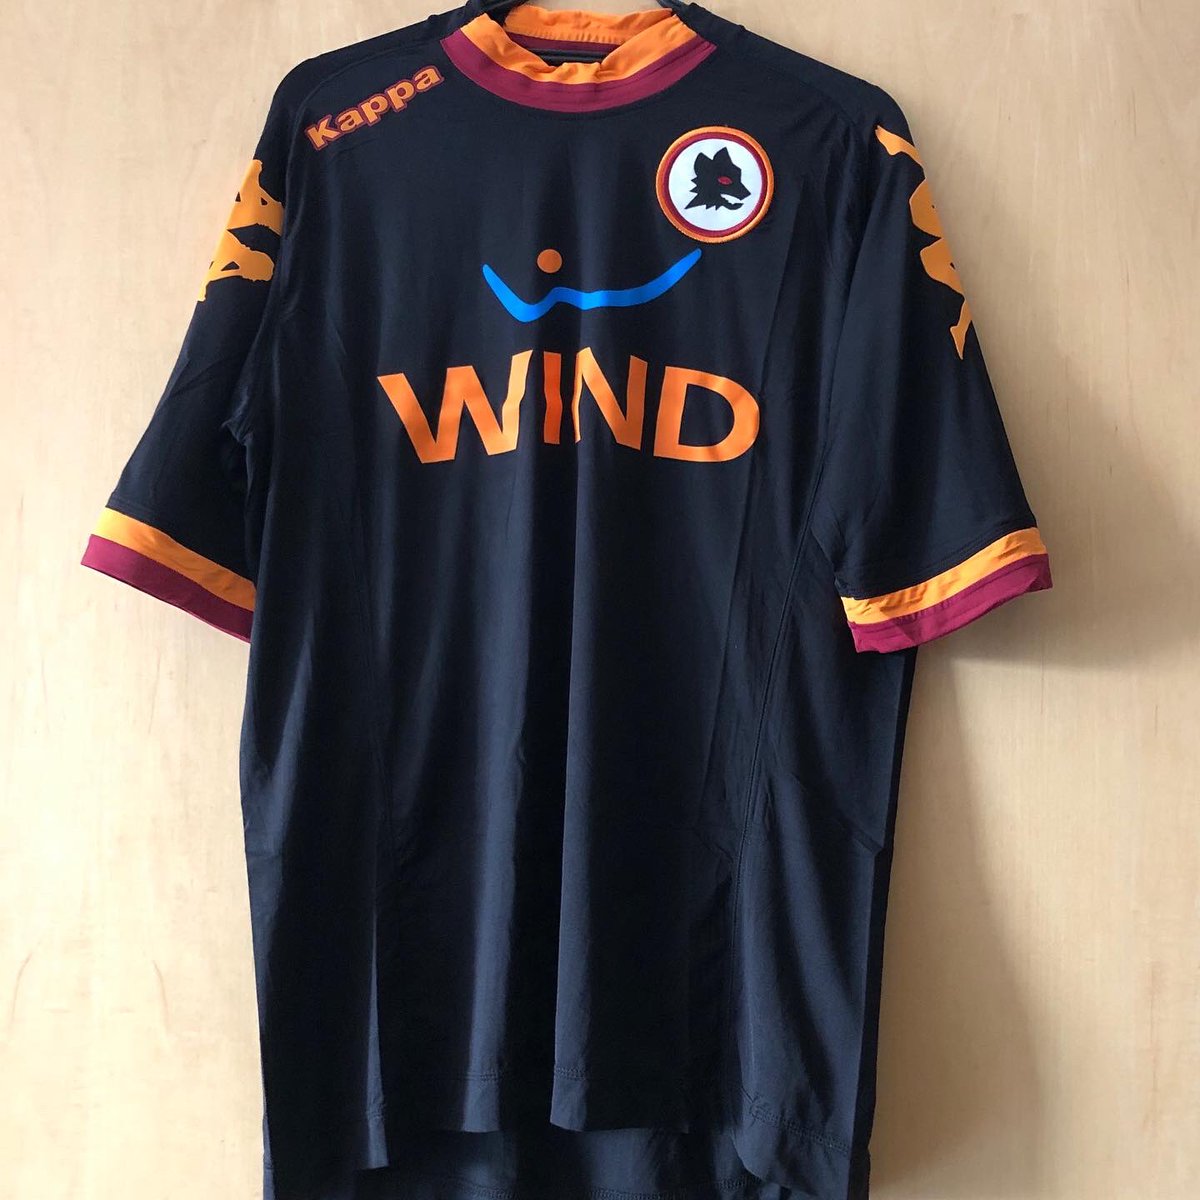 . @ASRomaENThird Kit, 2012/13 @Kappa_UKPersonalised: De Rossi, 16Damn extra-tight Kappa shirts. But I’m a sucker for Roma’s blue or black shirtsI got this one the day after De Rossi announced his departure from Roma, one of my favourite players ever #FootballShirtCollection